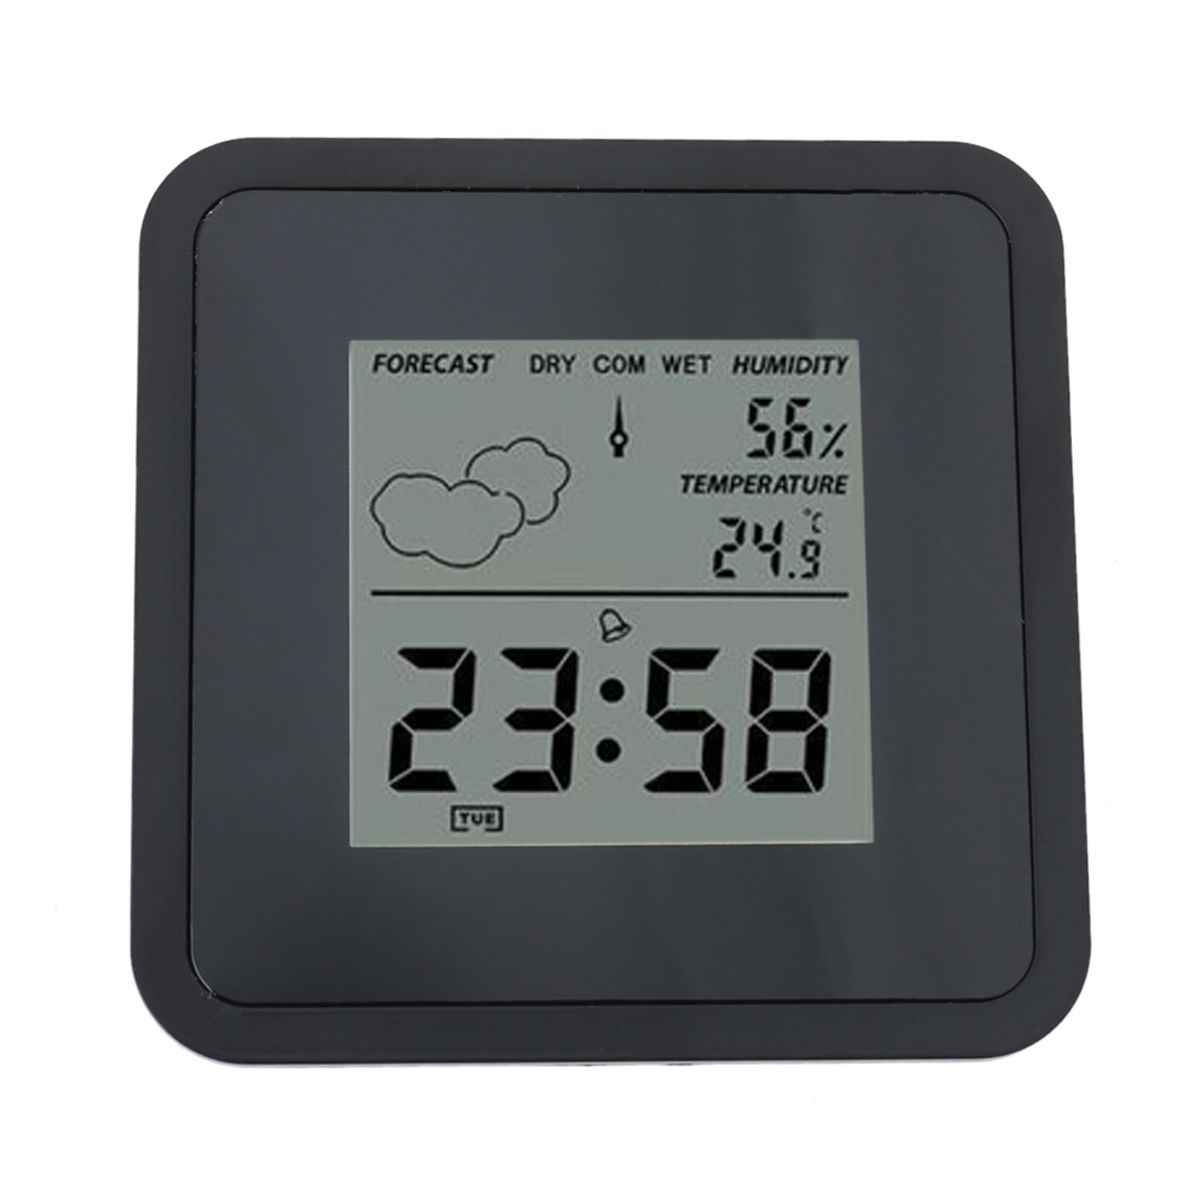 TS-S66-Digital-Thermometer-Hygrometer-0--60-Electronic-Thermometer-With-Calendar-And-Alarm-Clock-Fun-1441494